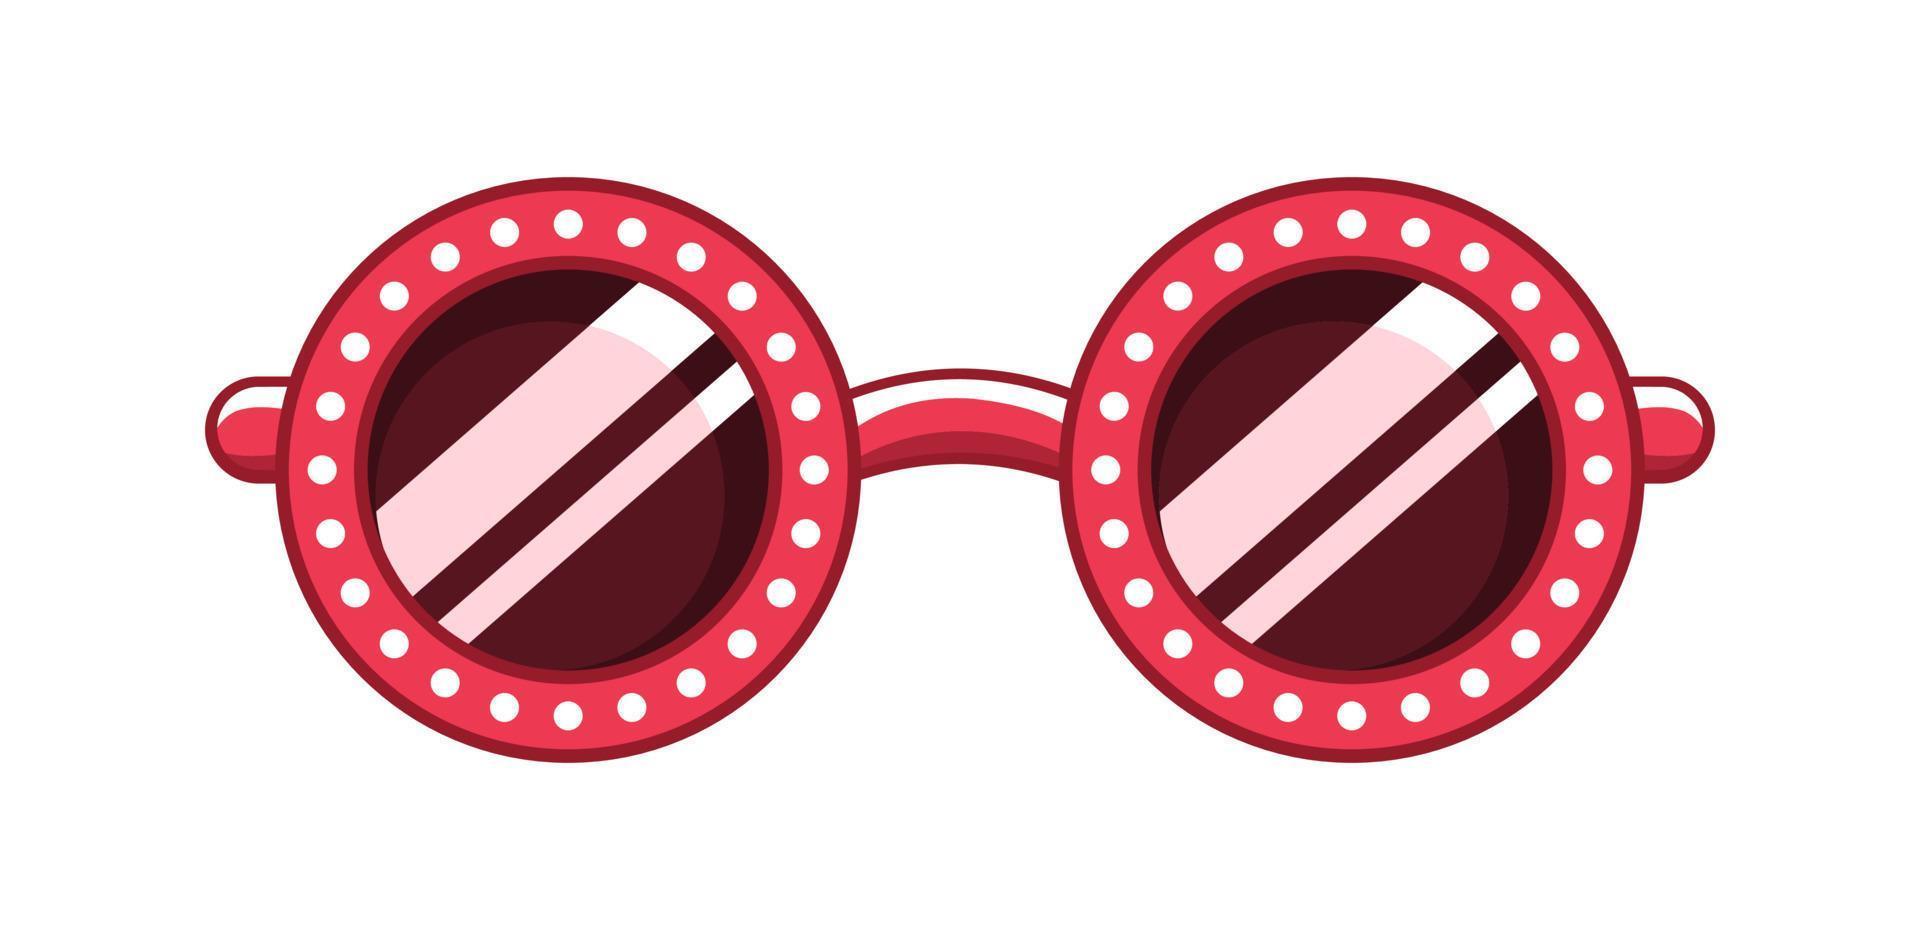 Red round shades sunglasses with white dot pattern clipart. Funky party glasses eyewear cartoon vector illustration.